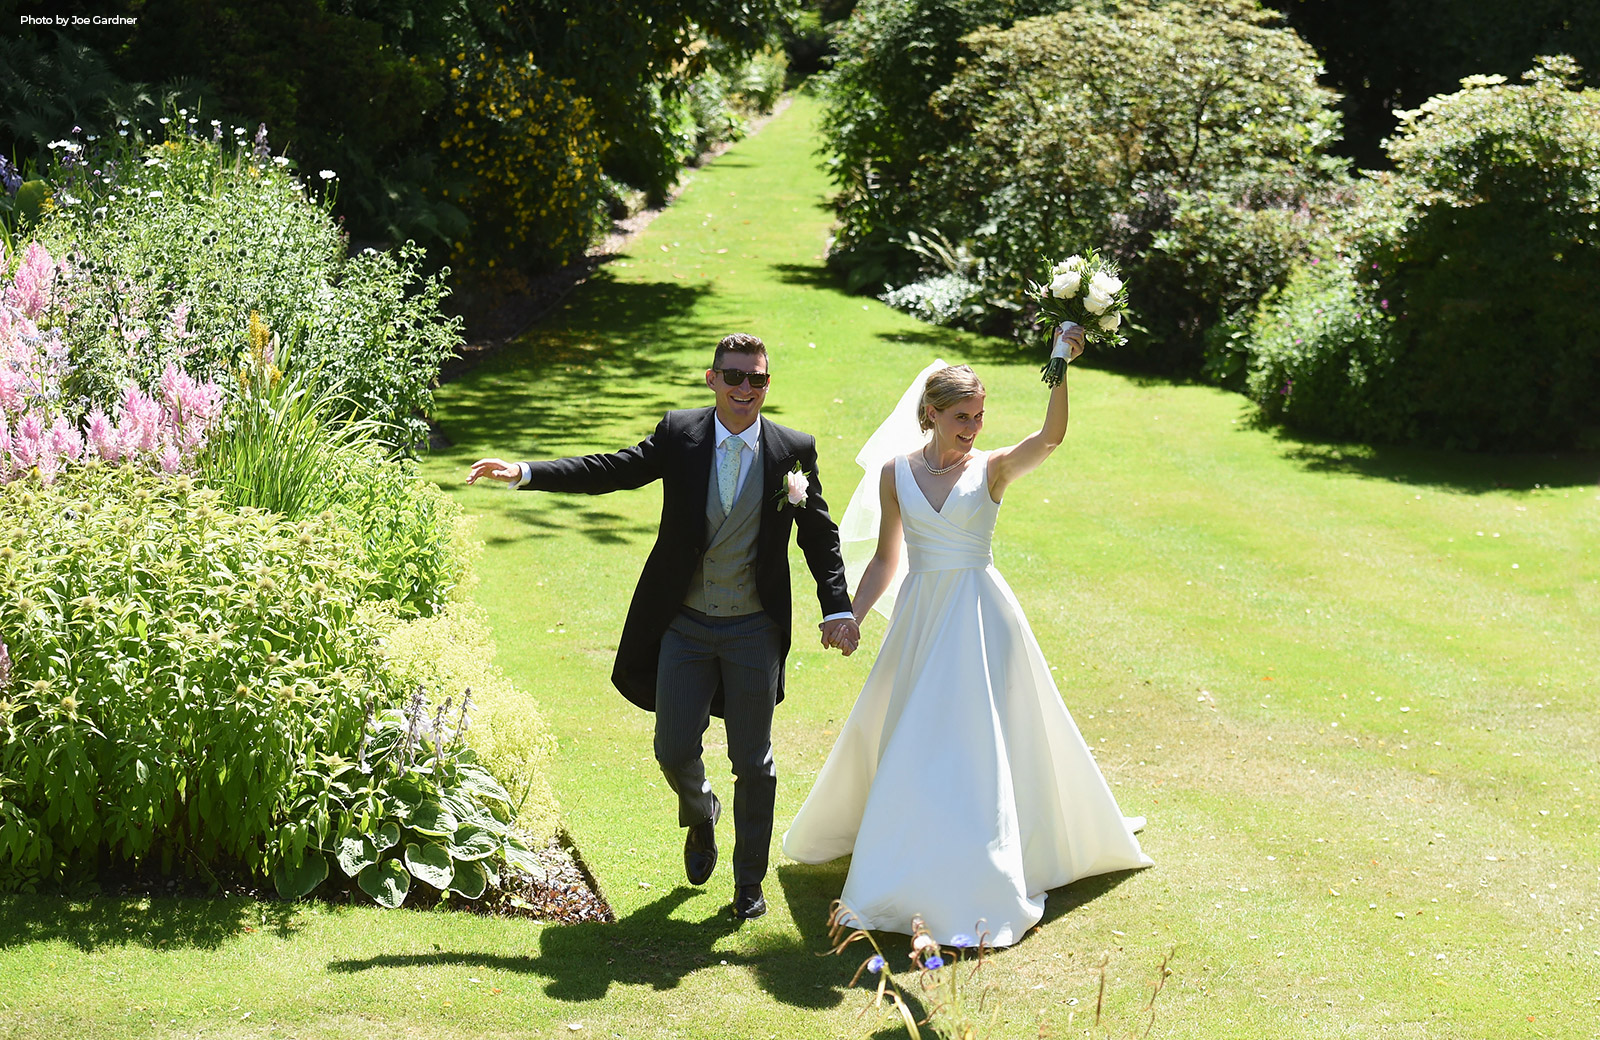 Bride and Groom walking through the sunlight gardens at Hilltop Country House.